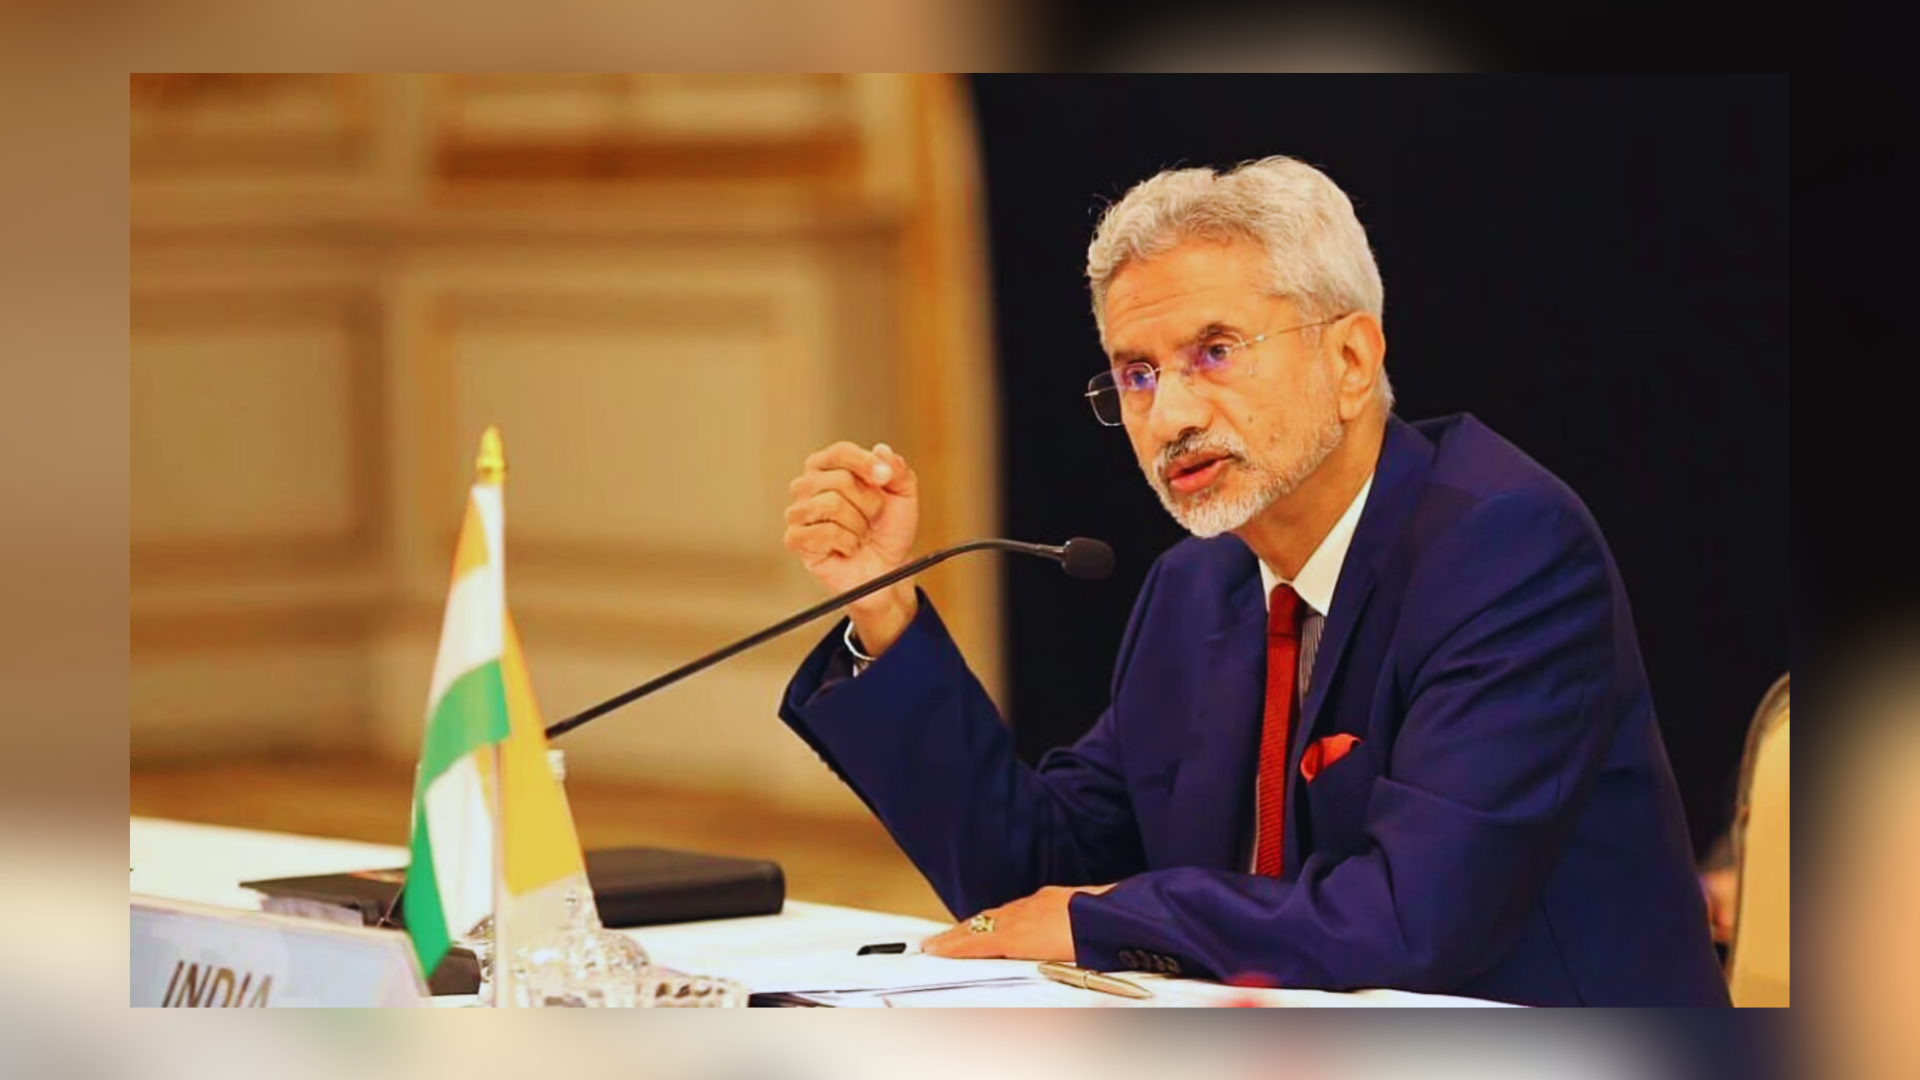 Jaishankar Reacts To US Sanction Warning Following Chabahar Port Deal: “Don’t Think People Should Take Narrow View Of It”